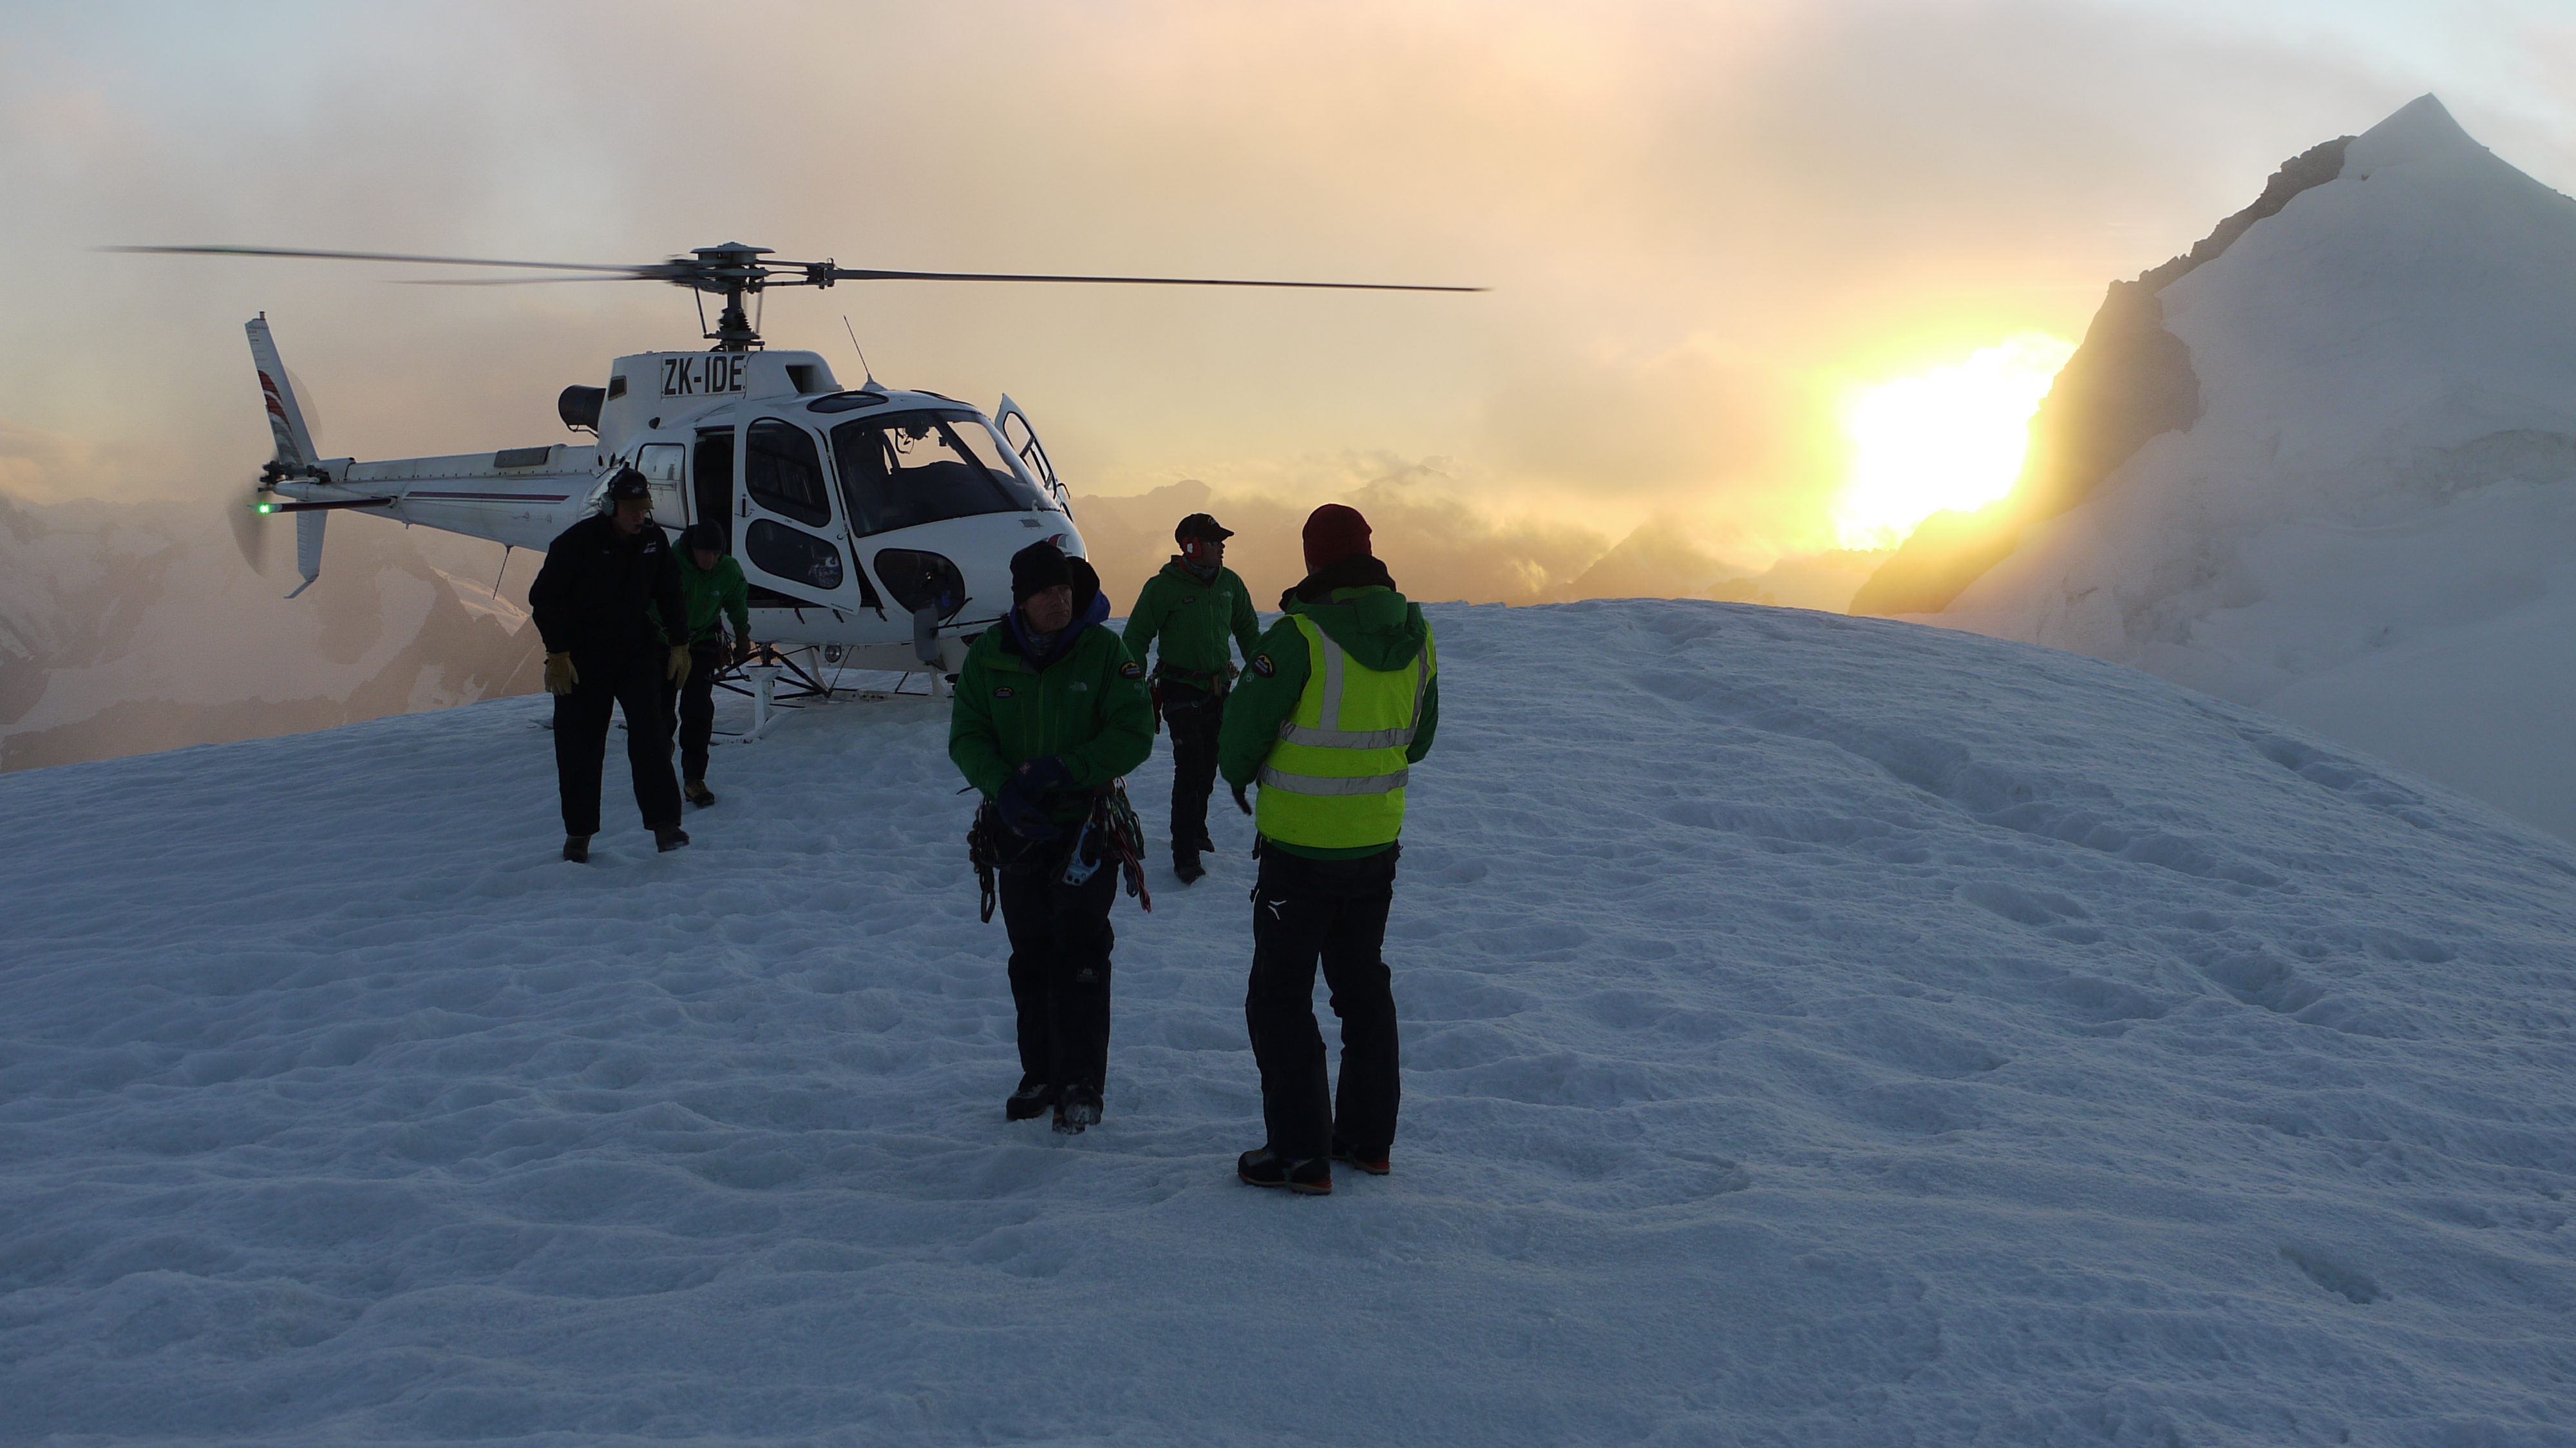 Helicopter at dawn during filming of Beyond the Edge